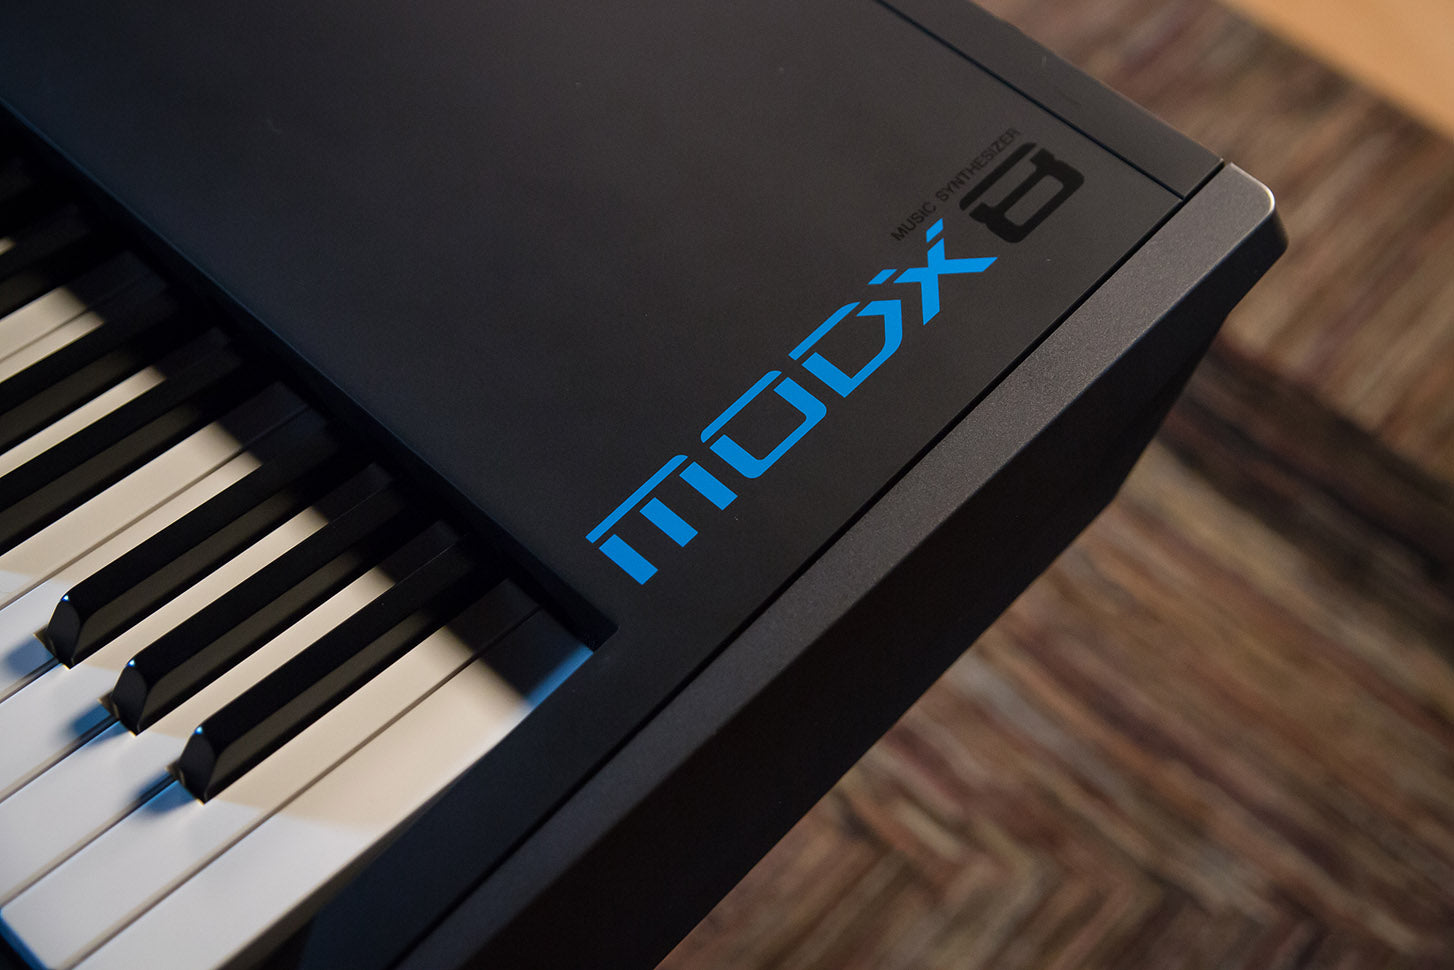 Cool MODX Is Yamaha's Portable, Affordable Montage